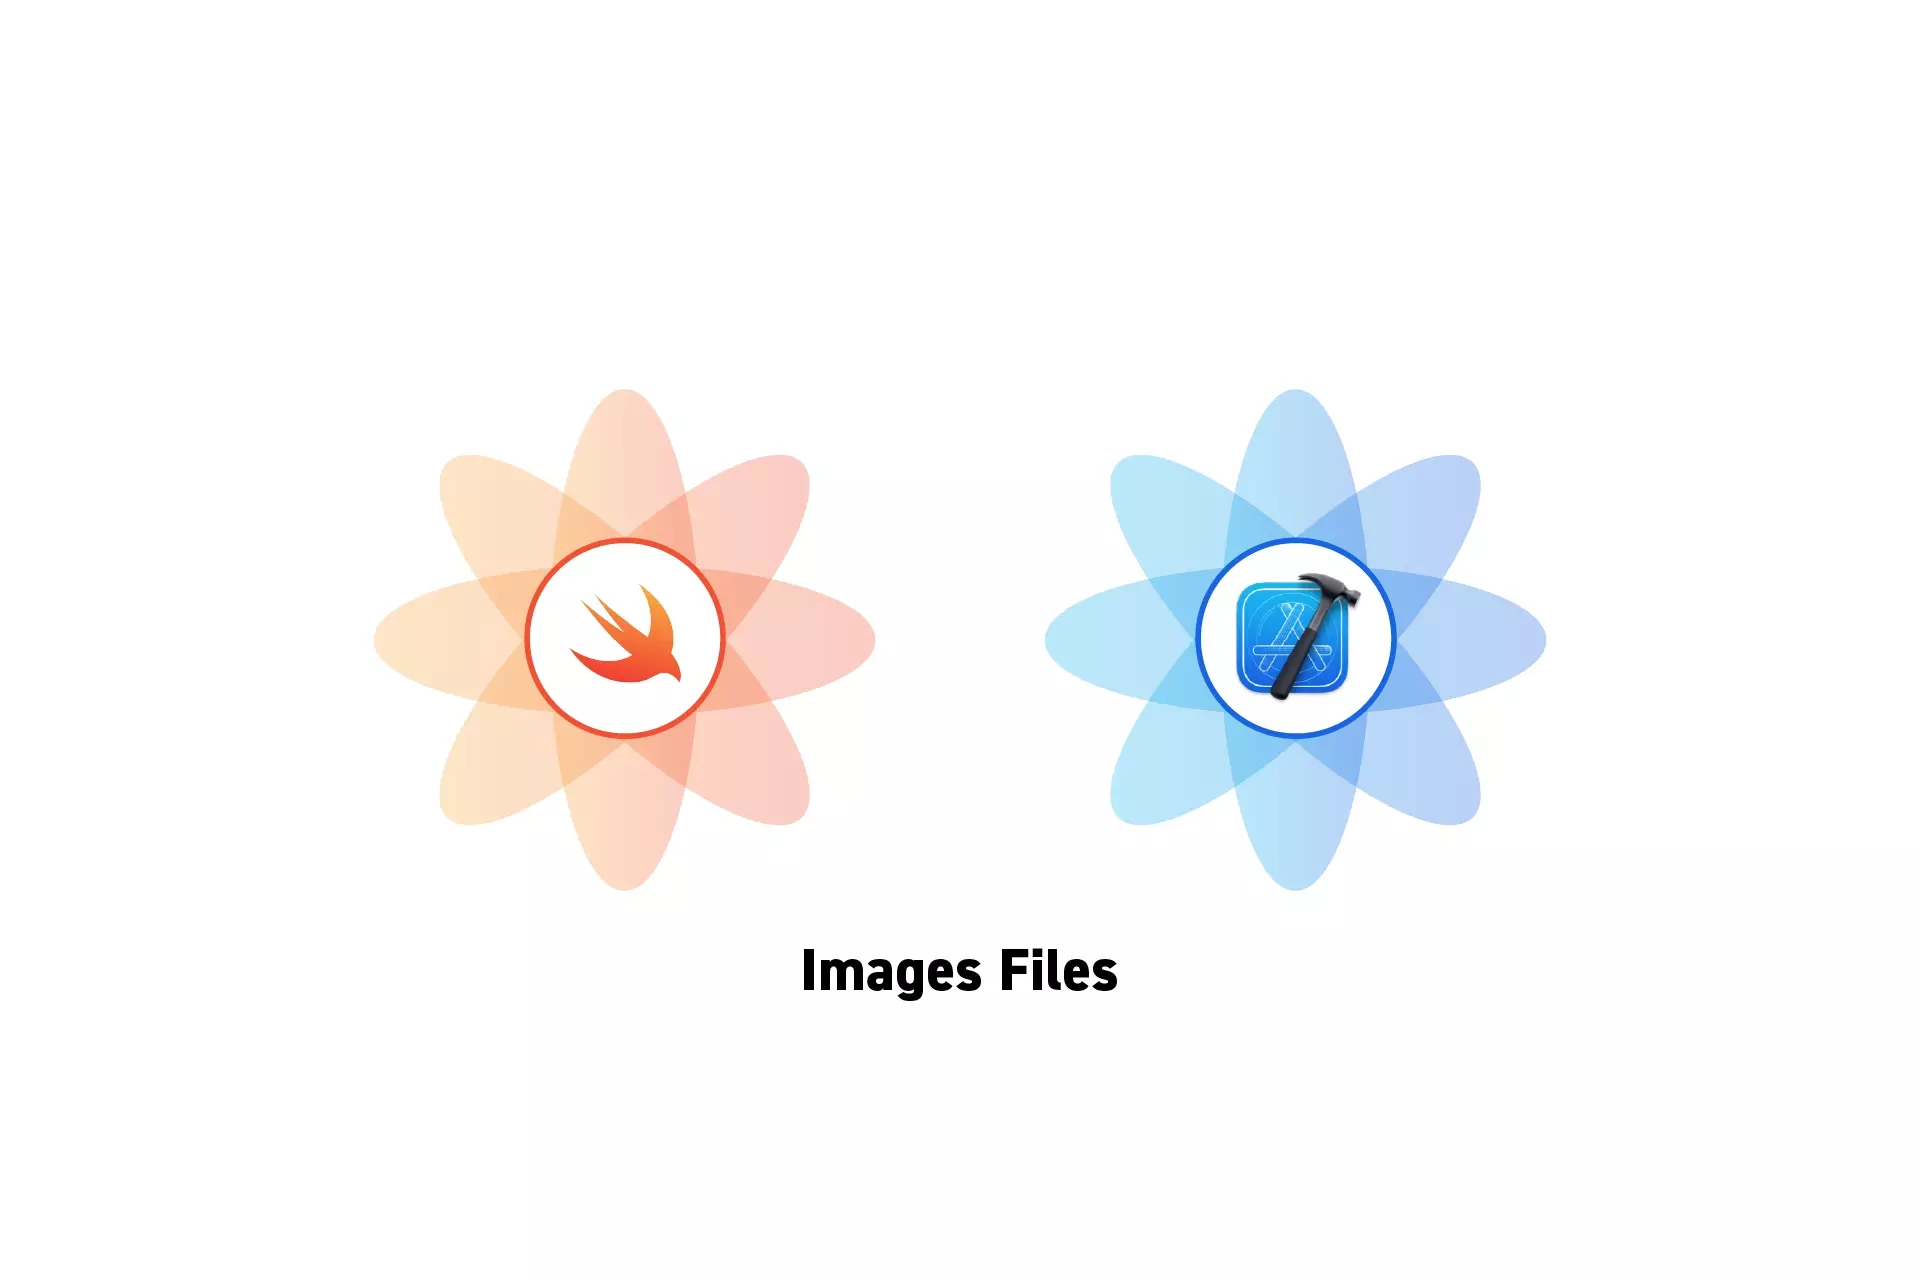 Two flowers that represent Swift and XCode side by side. Beneath them sits the text “Image Files”.